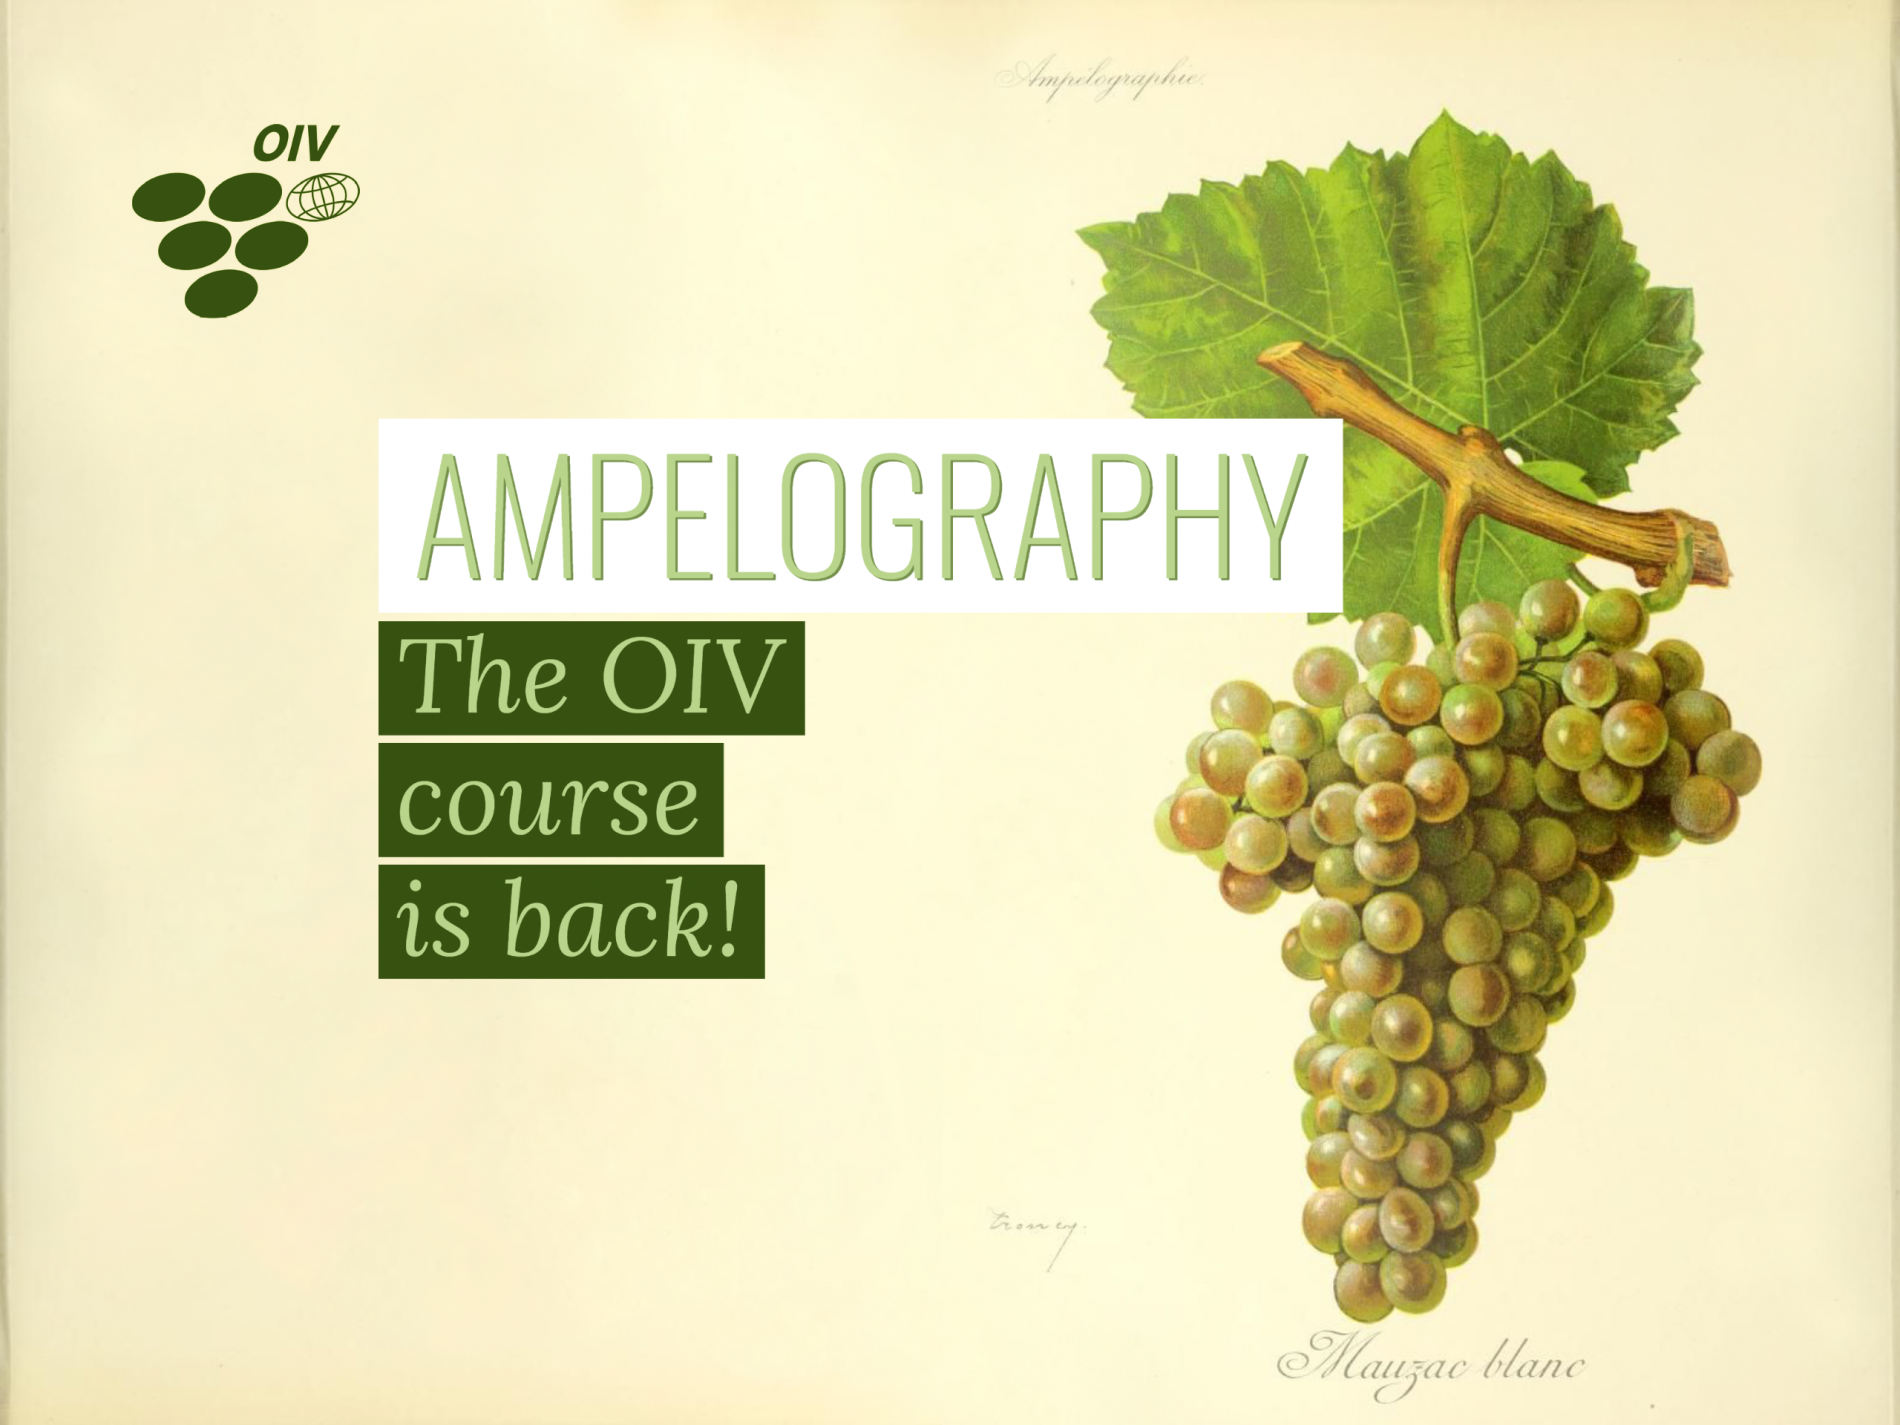 The OIV works to disseminate ampelography